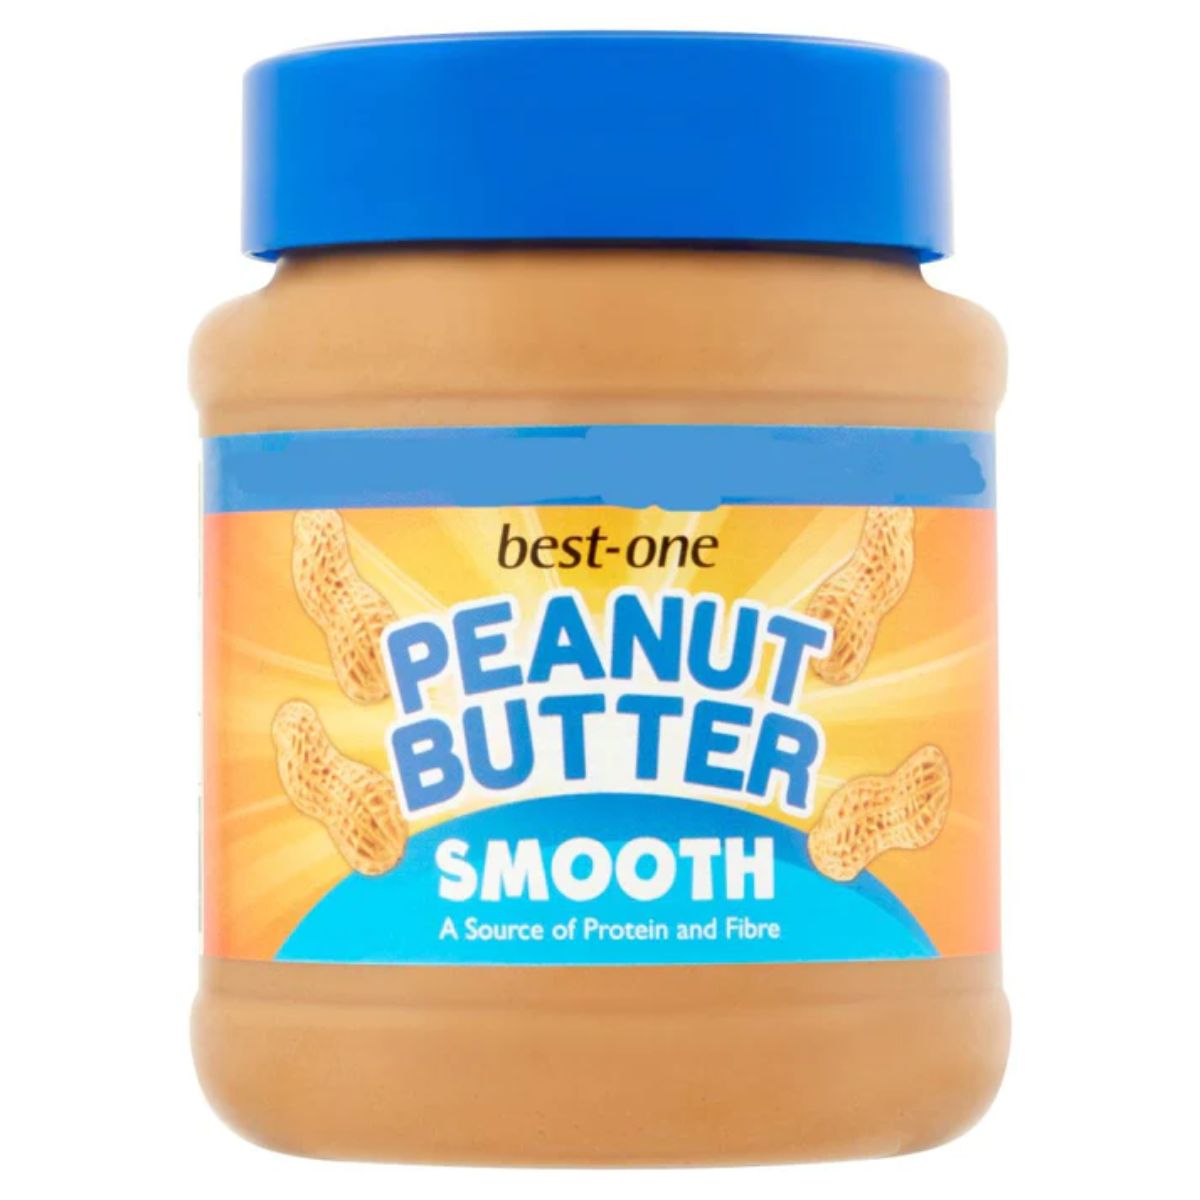 A jar of Best One - Peanut Butter Smooth - 340g.